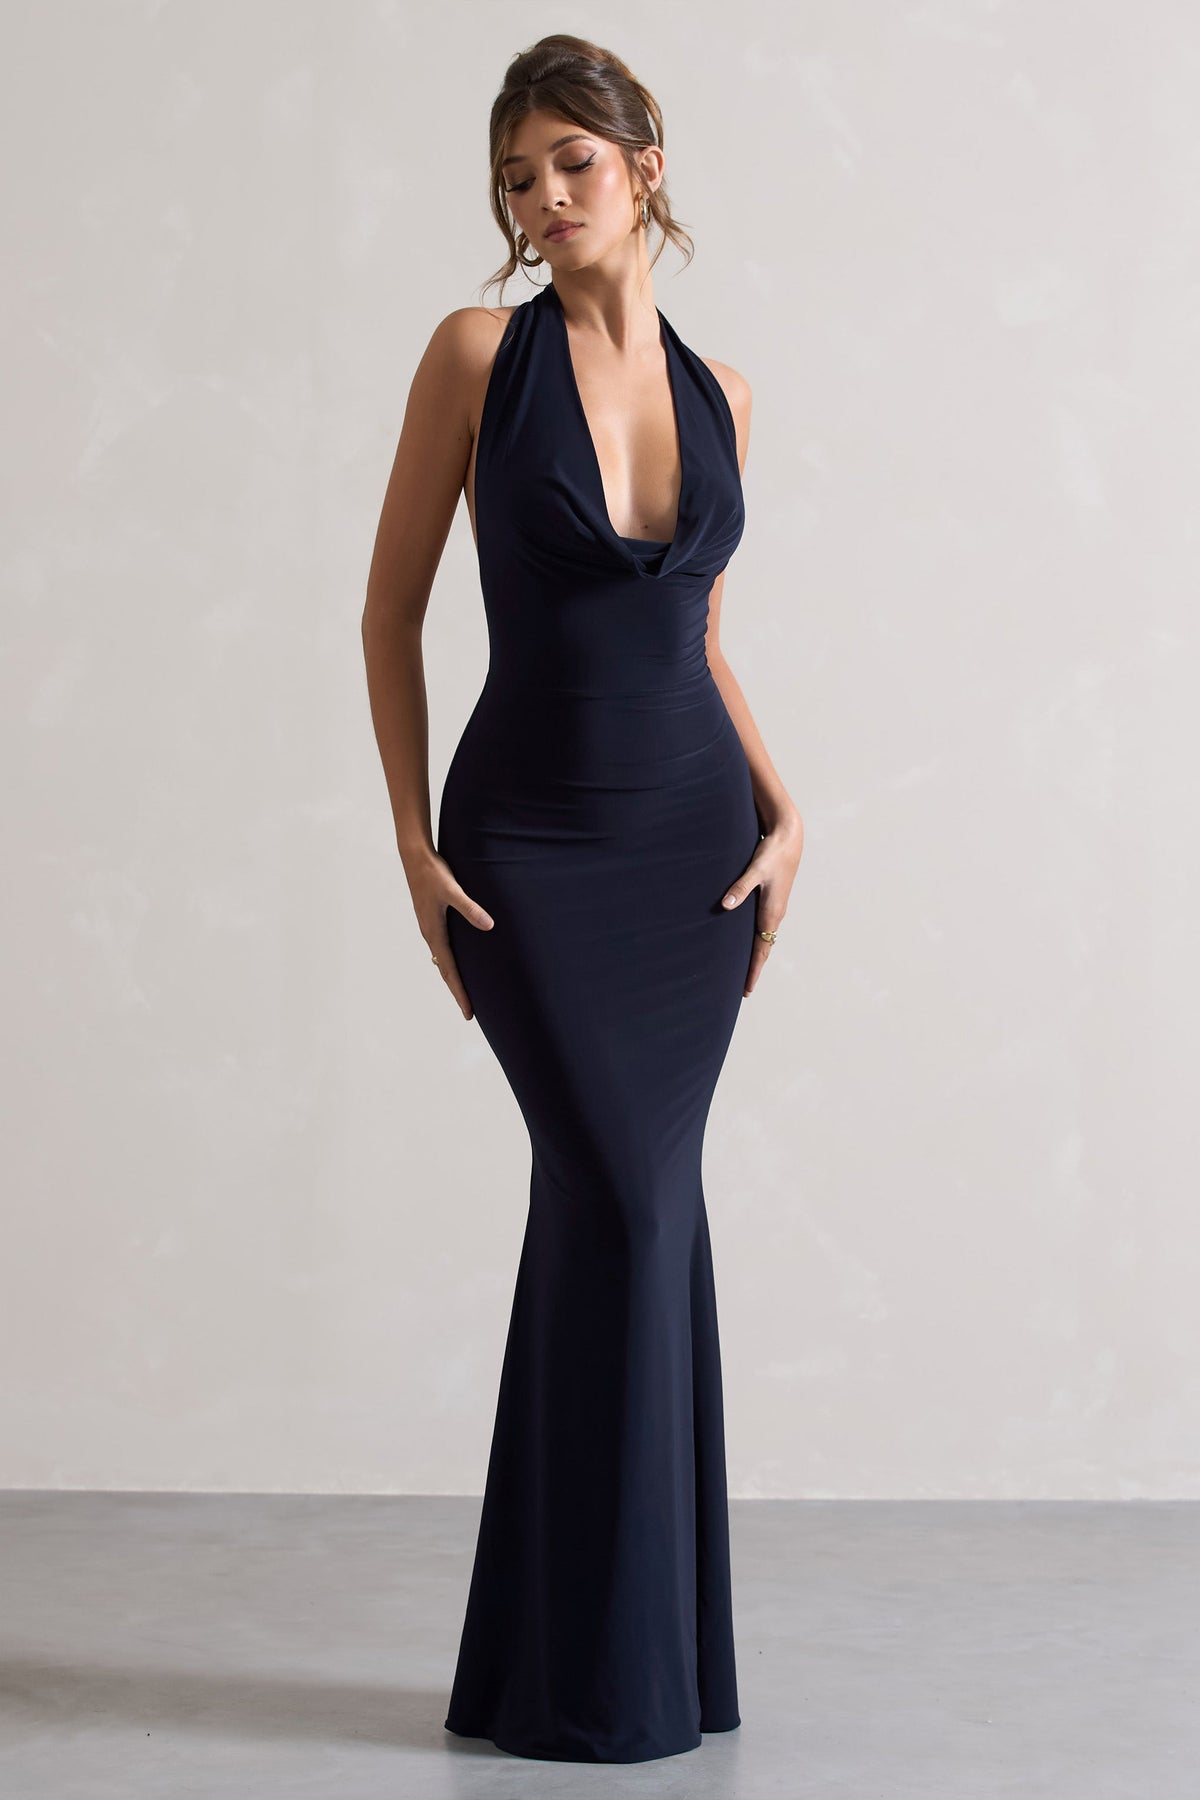 Strapless Scoop Back Maxi Bridesmaid Dress With Front Slit In Cobalt Blue